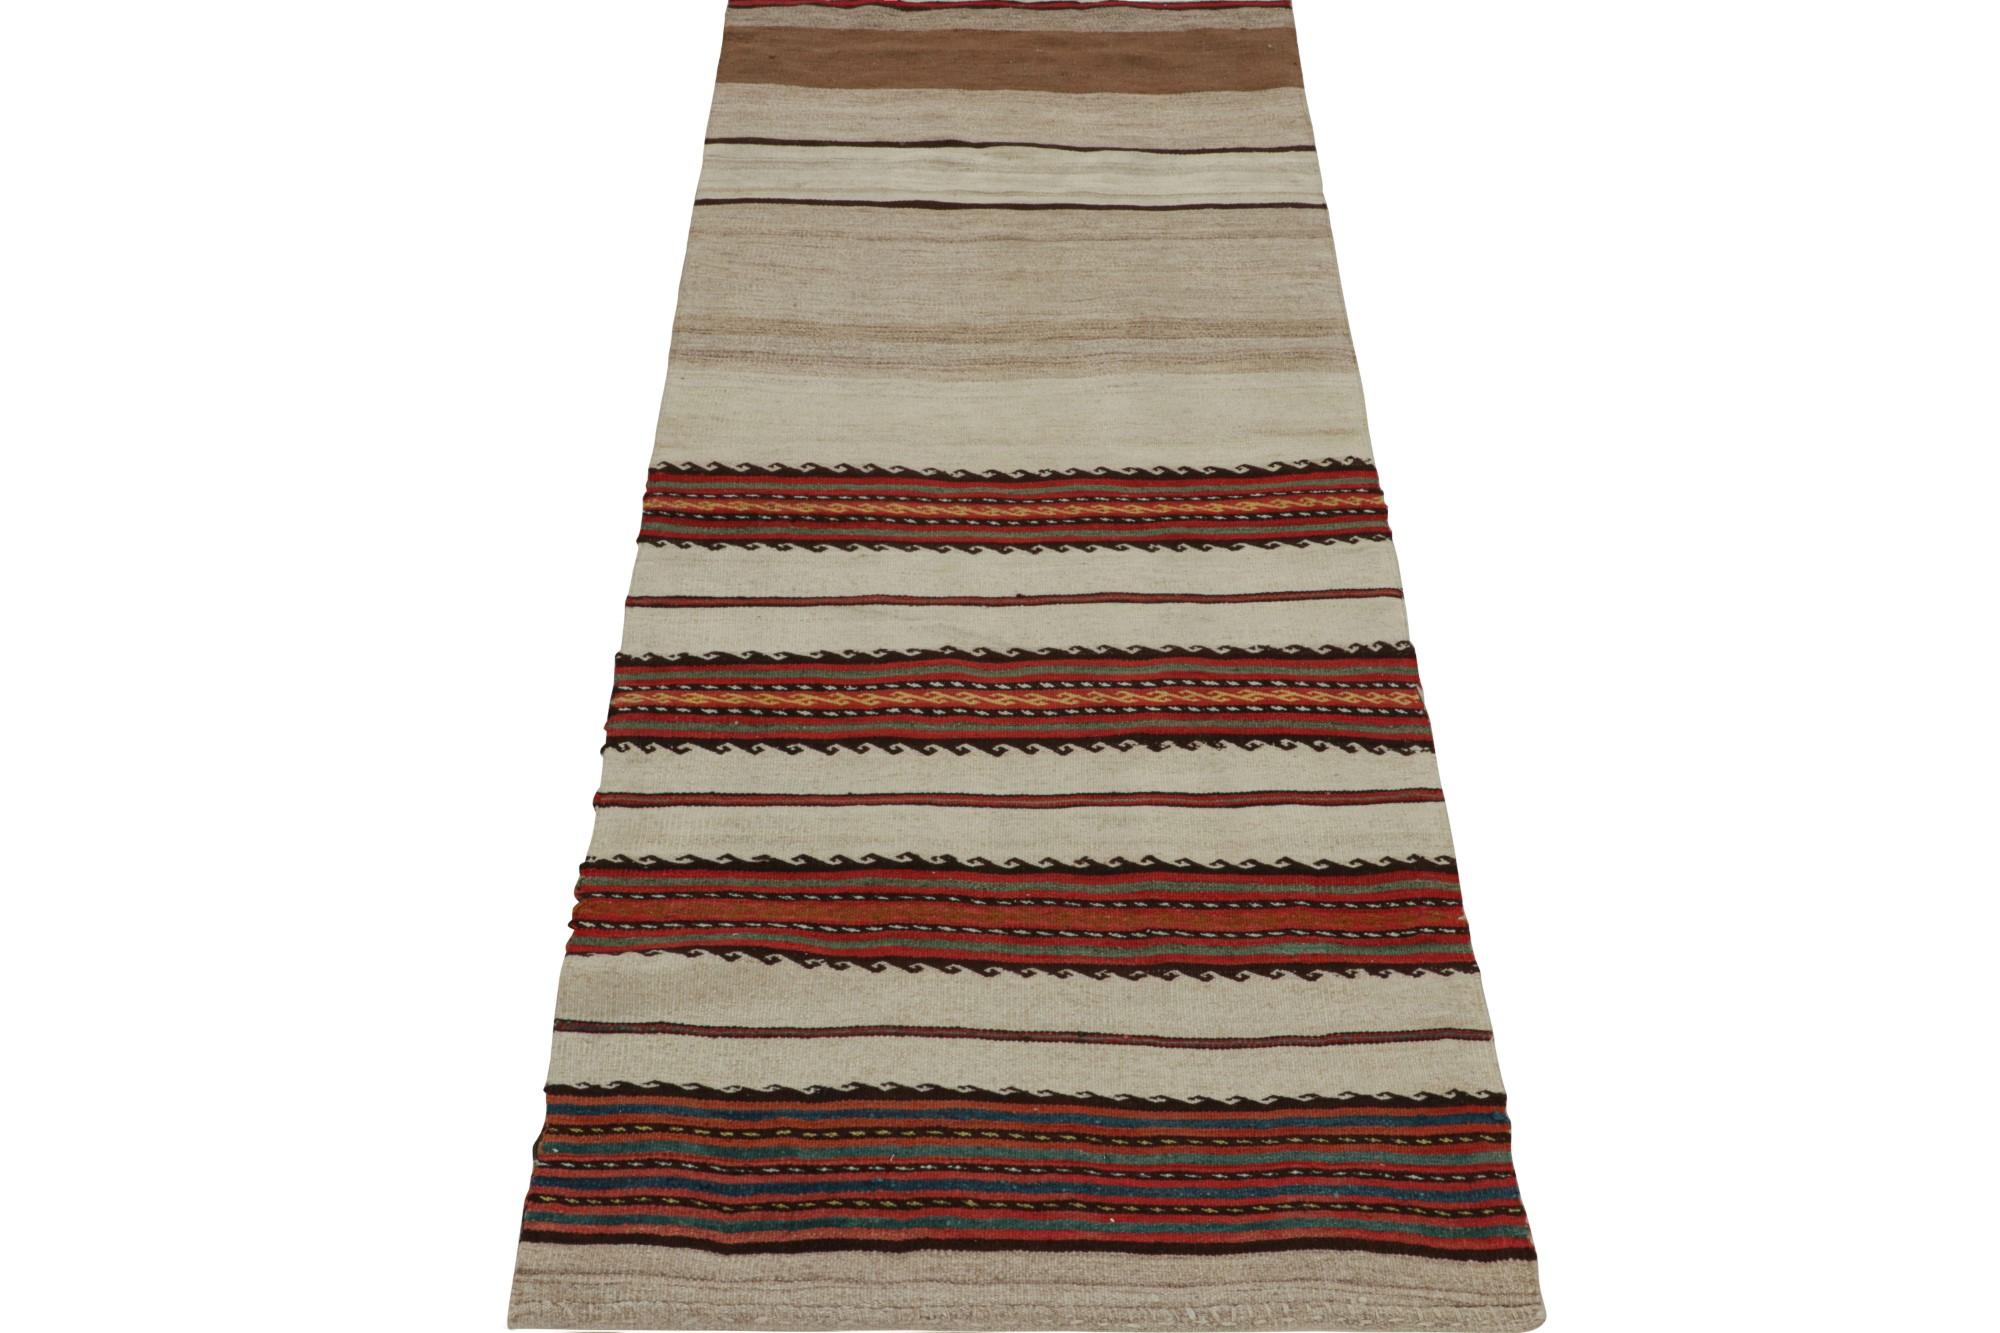 Hand-Woven Vintage Afghan Tribal Kilim Runner Rug in Beige, with Stripes, from Rug & Kilim  For Sale